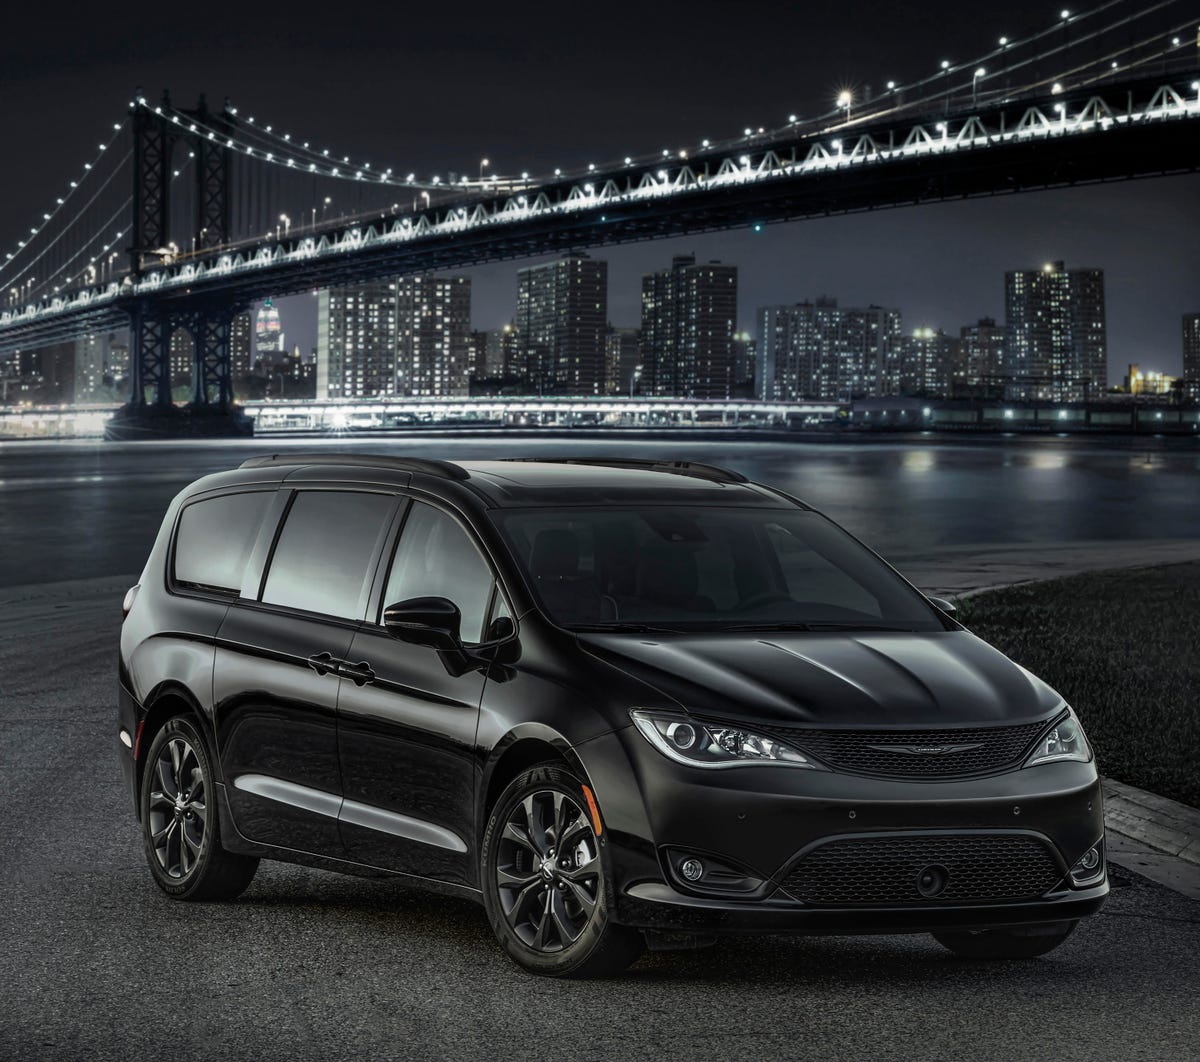 2018 Chrysler Pacifica S Appearance Package